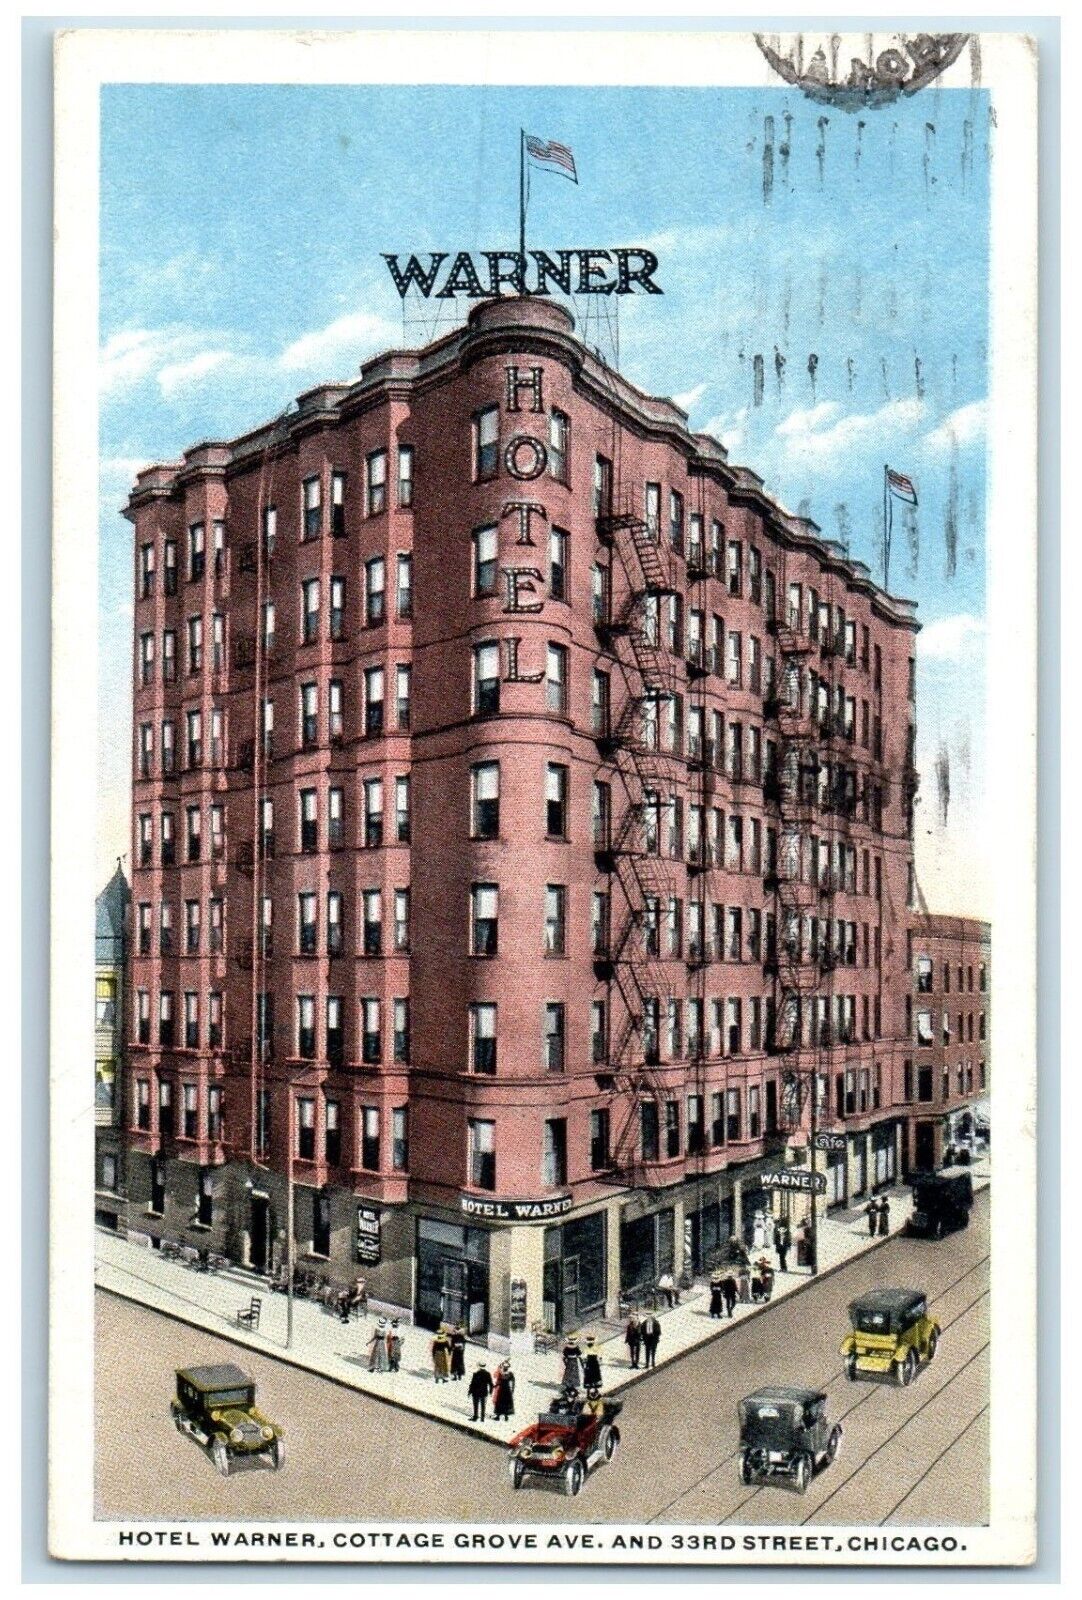 1917 Aerial Hotel Warner Building Cottage Grove Ave Chicago Illinois IL Postcard